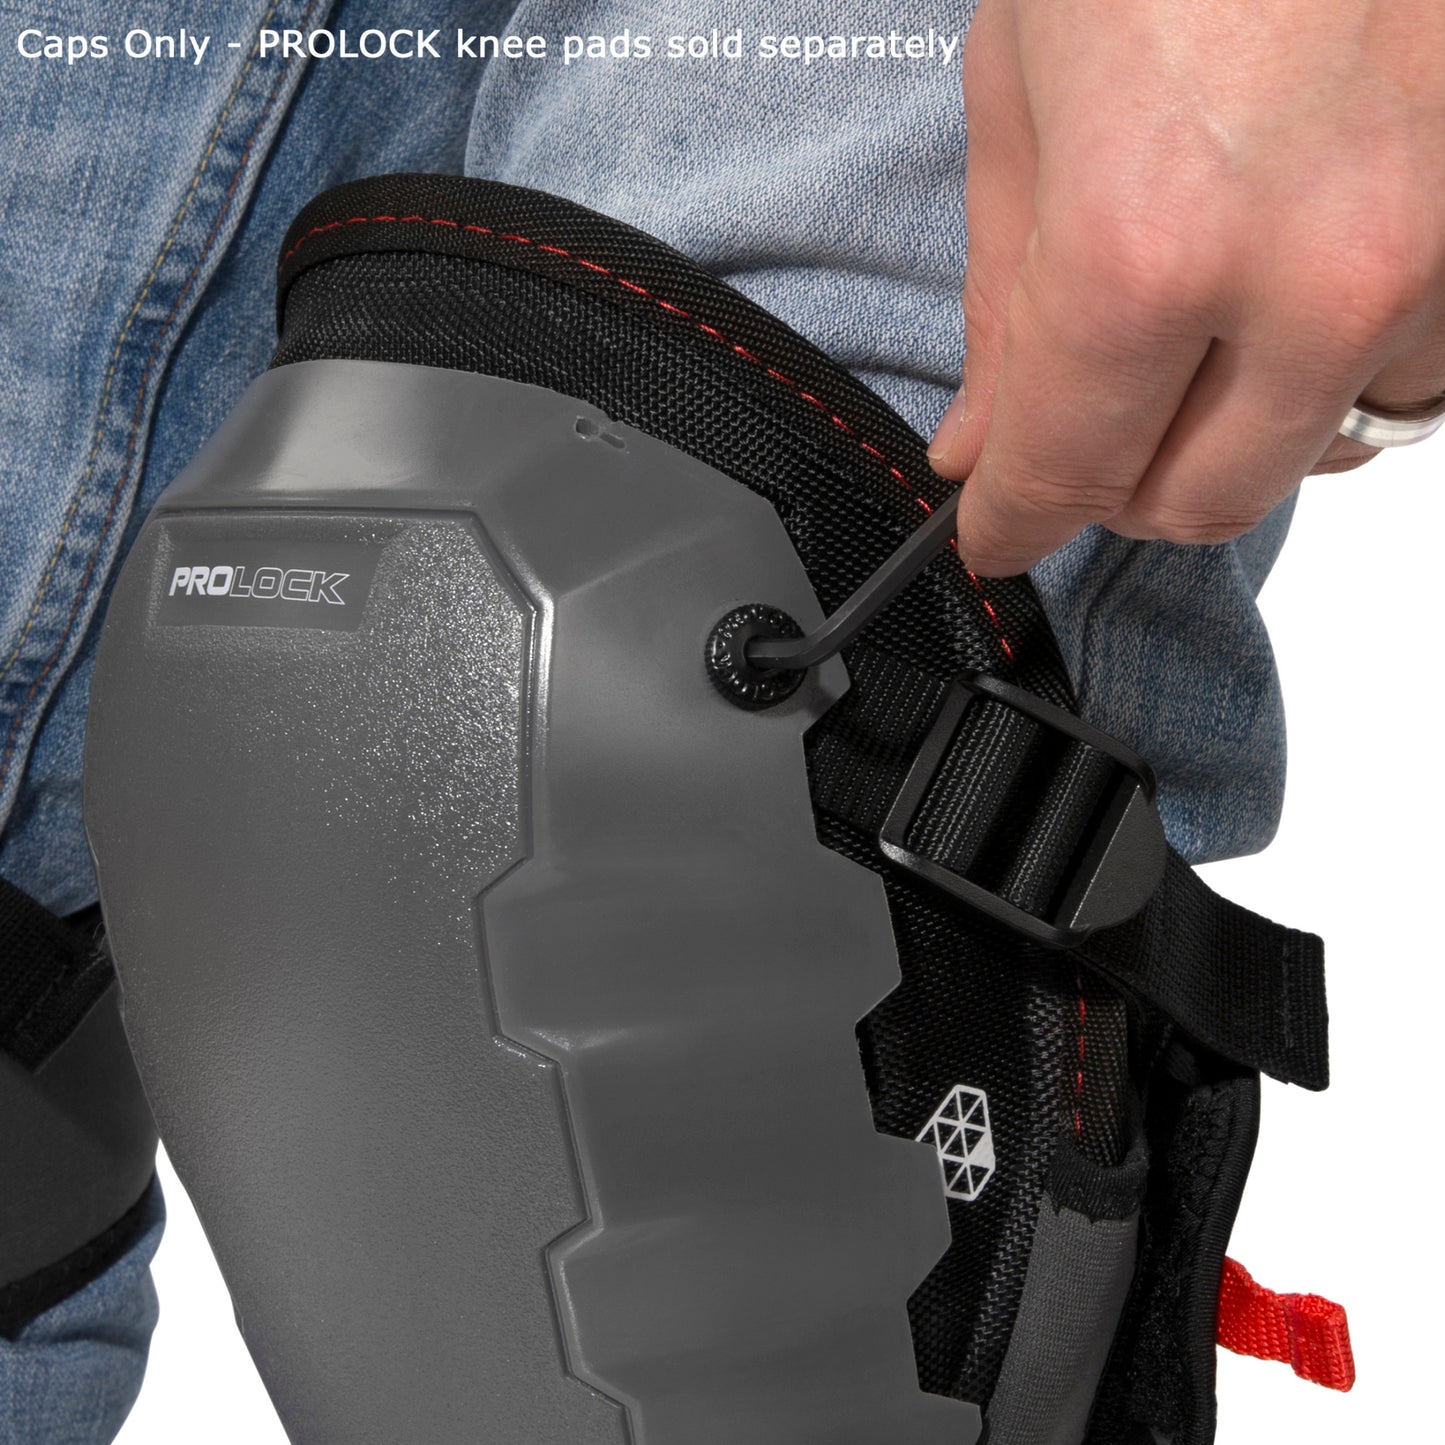 Non-Marring Cap Attachment for PROLOCK Knee Pads (1 pair, caps only)